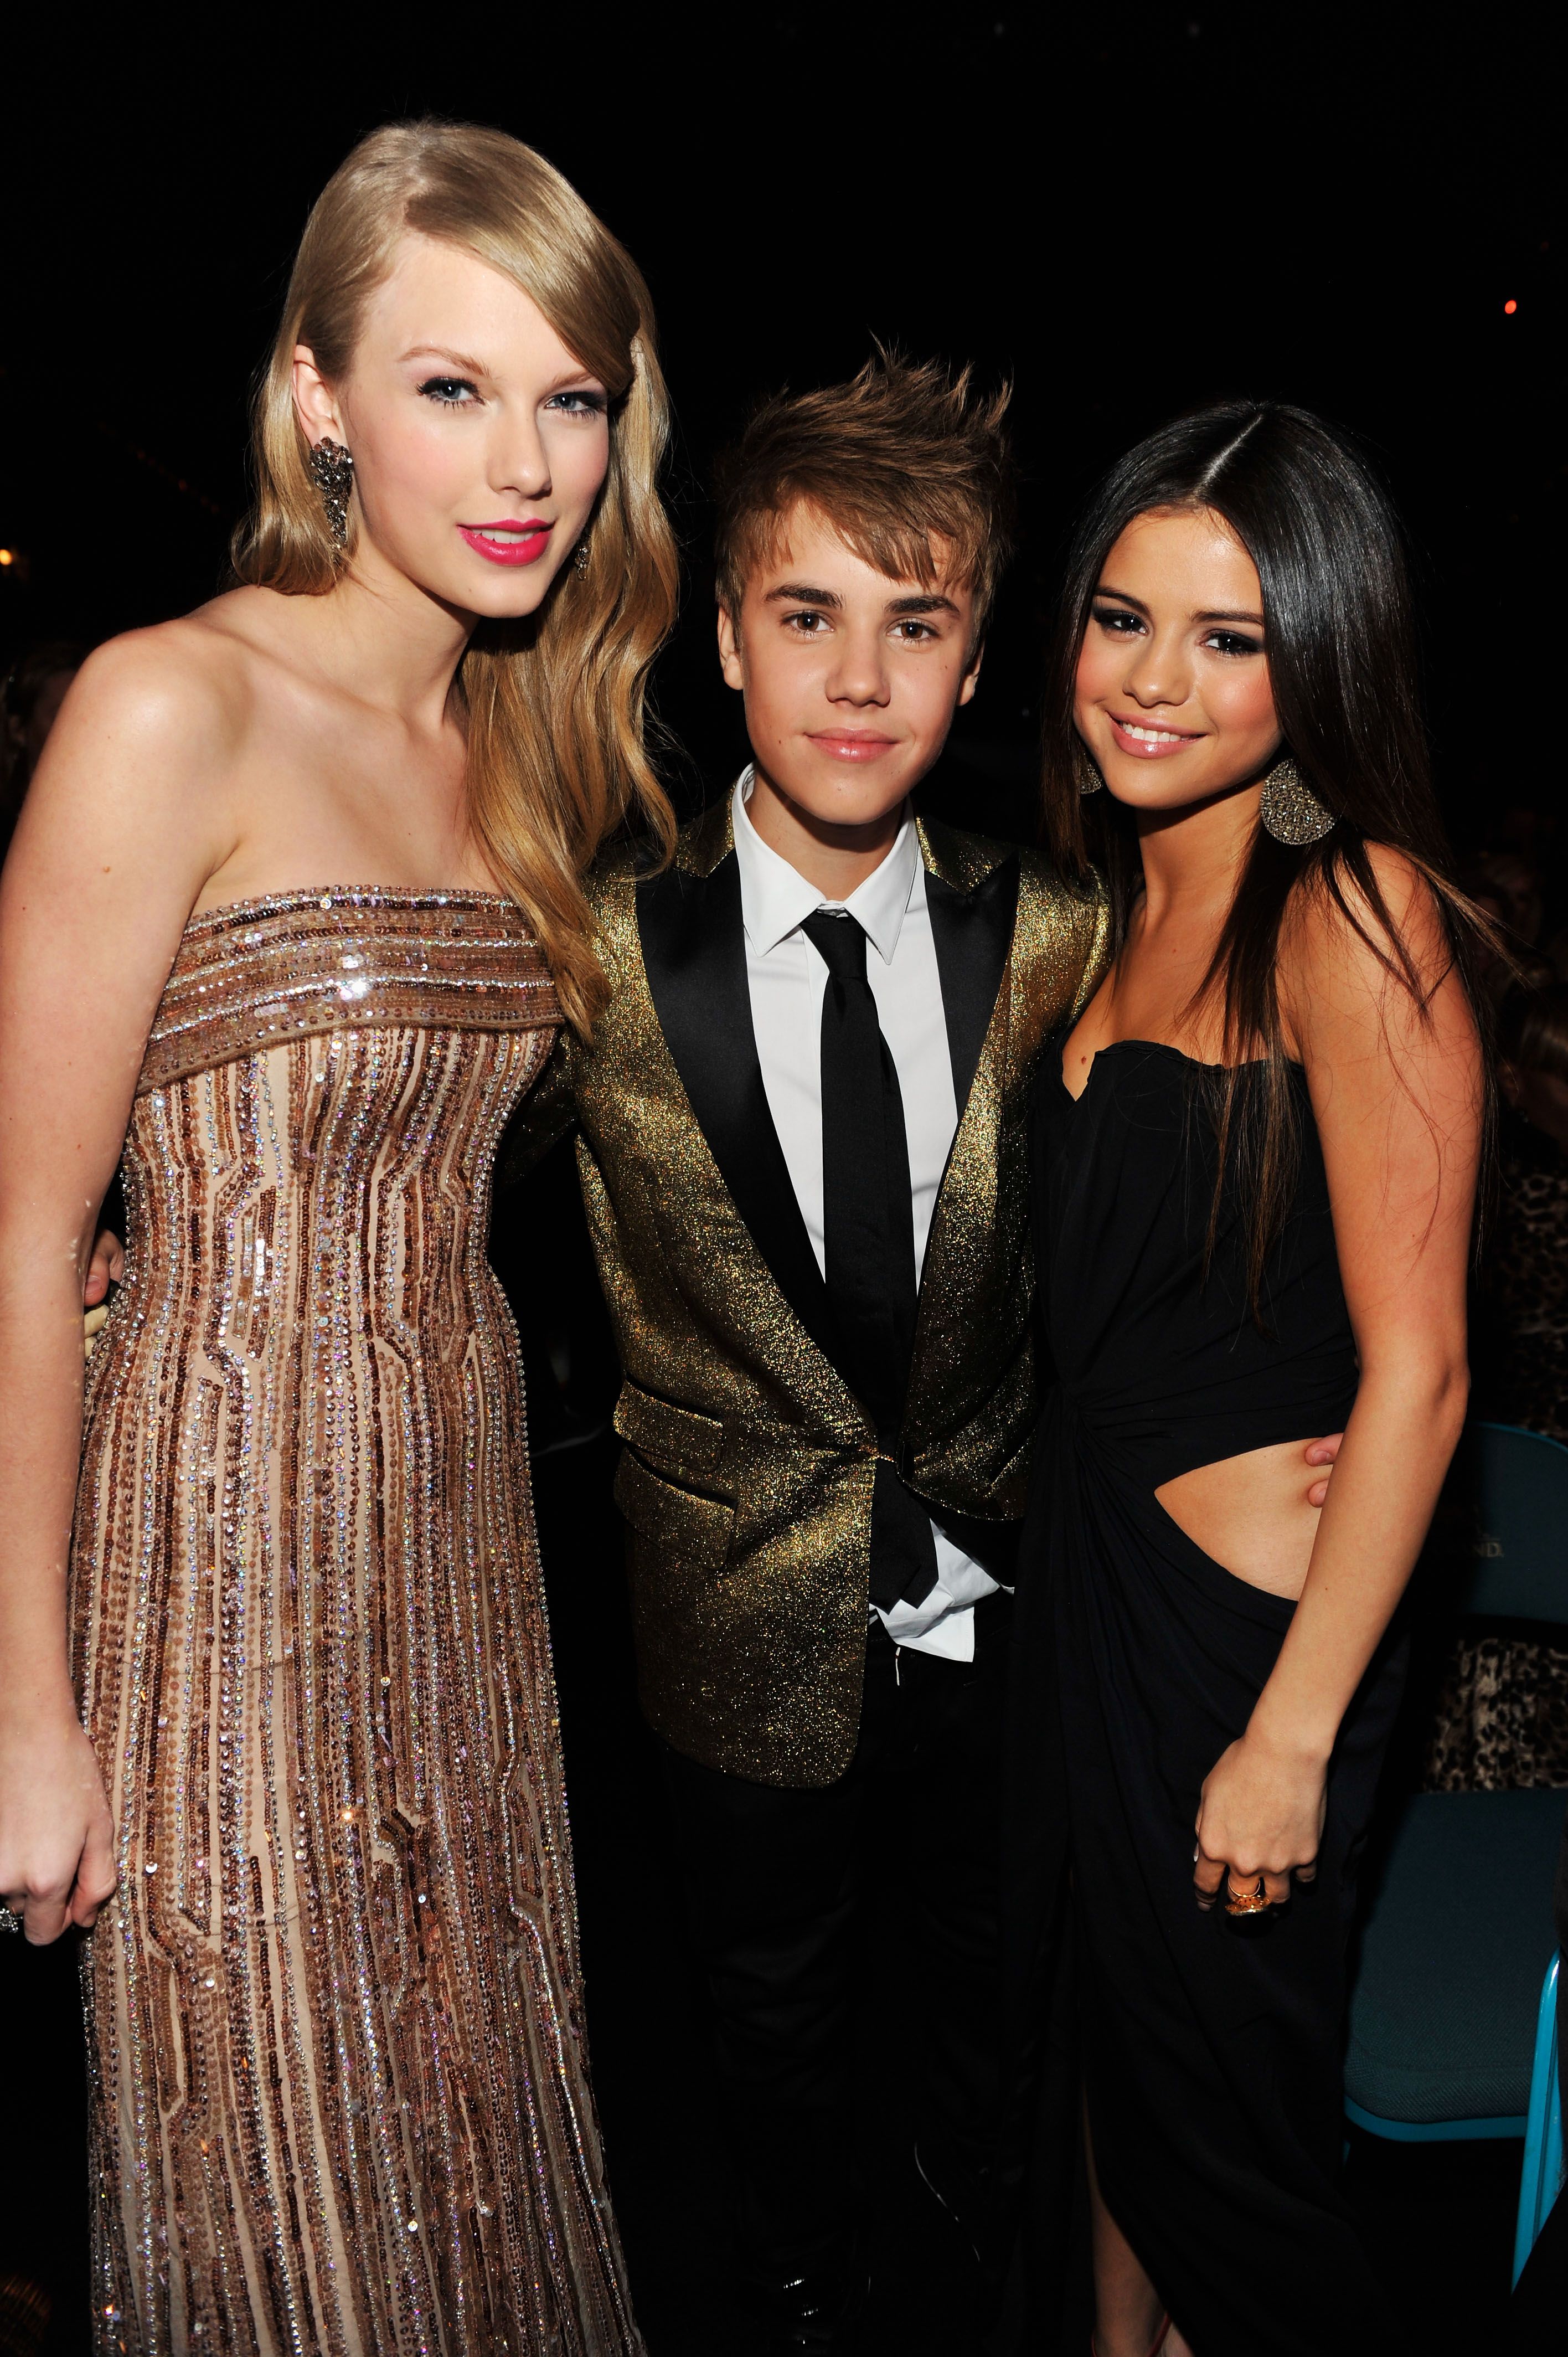 Taylor Swift Confirms Justin Bieber Cheated On Selena Gomez image